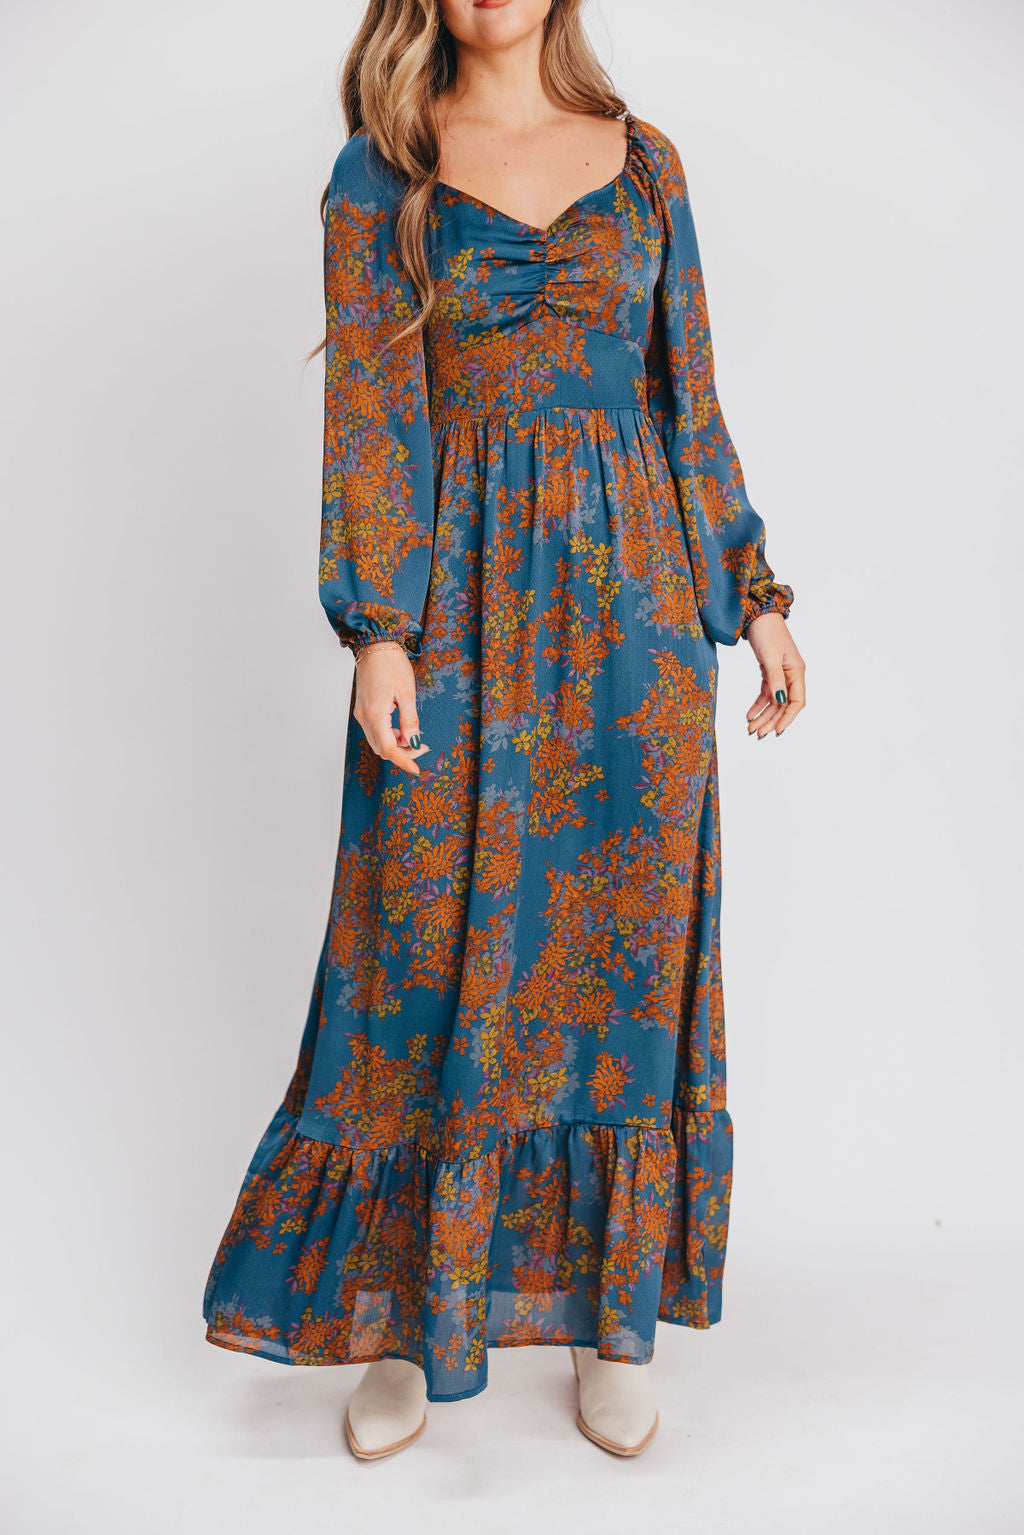 Emmy Sweetheart Neckline Maxi Dress in Teal / Mustard Floral - Bump Friendly - Inclusive Sizing (XS-3XL)